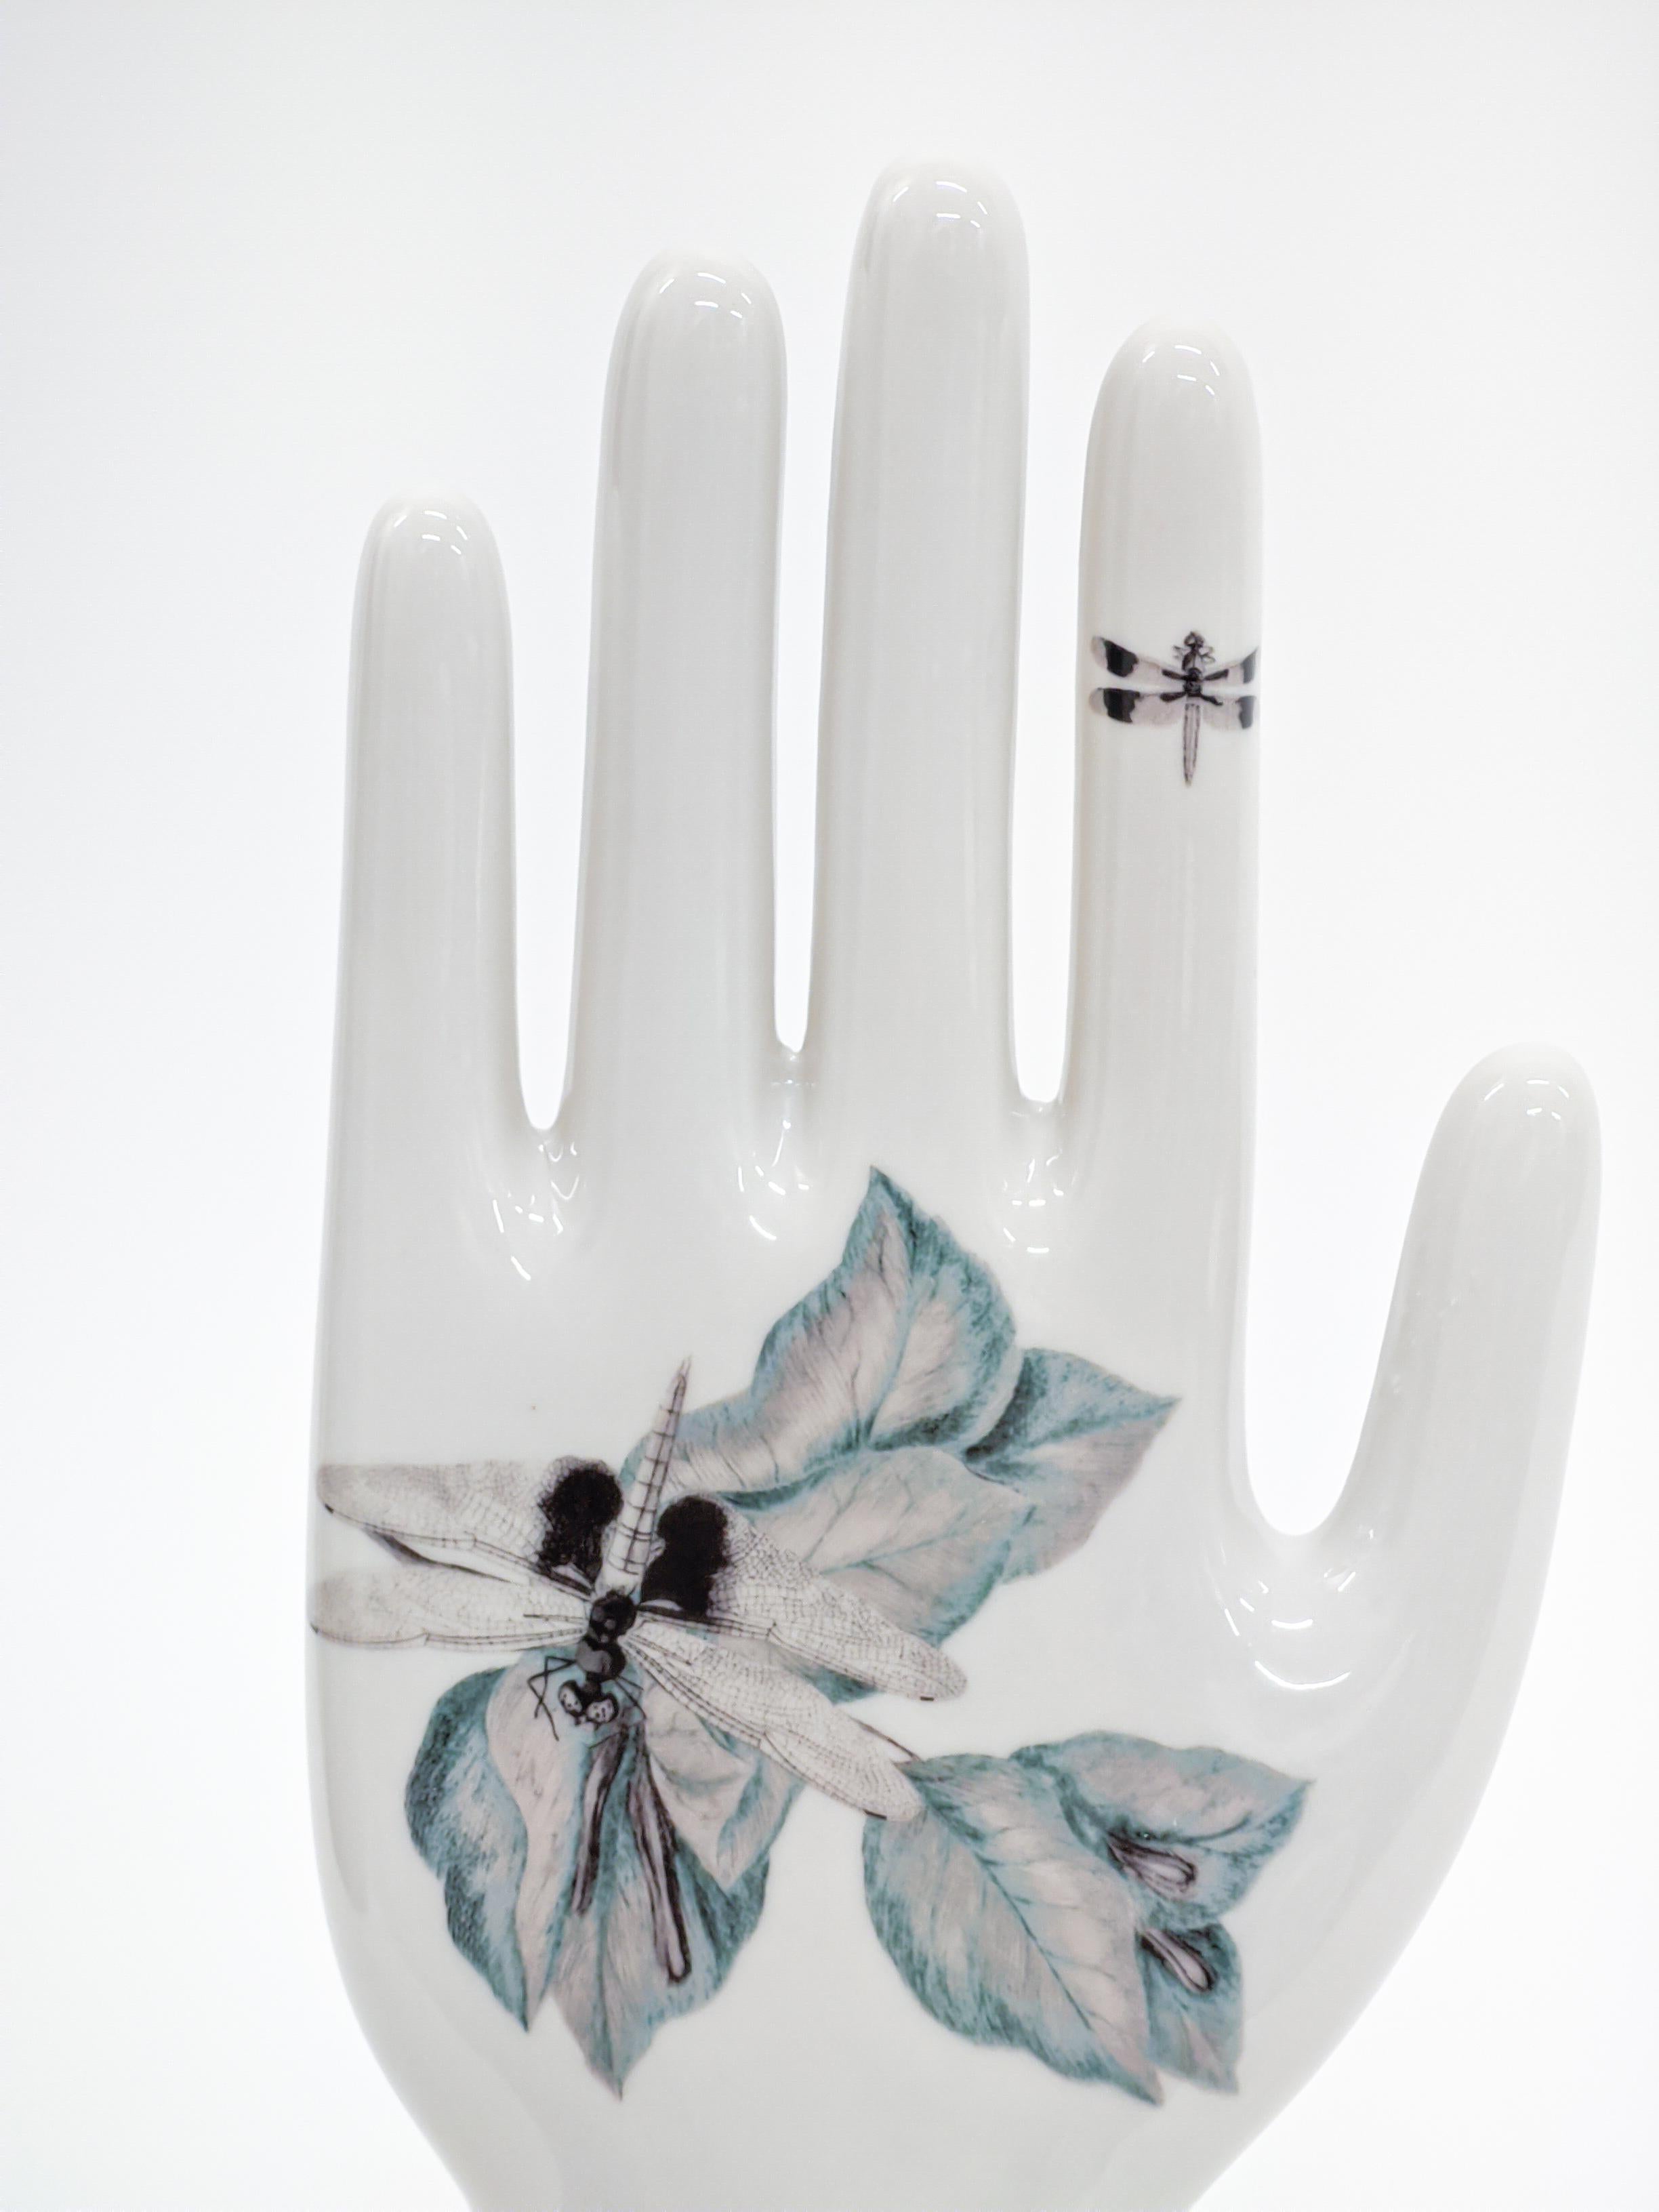 Molded Anatomica, Porcelain Hand with leaves and dragonflies Decoration by Vito Nesta For Sale